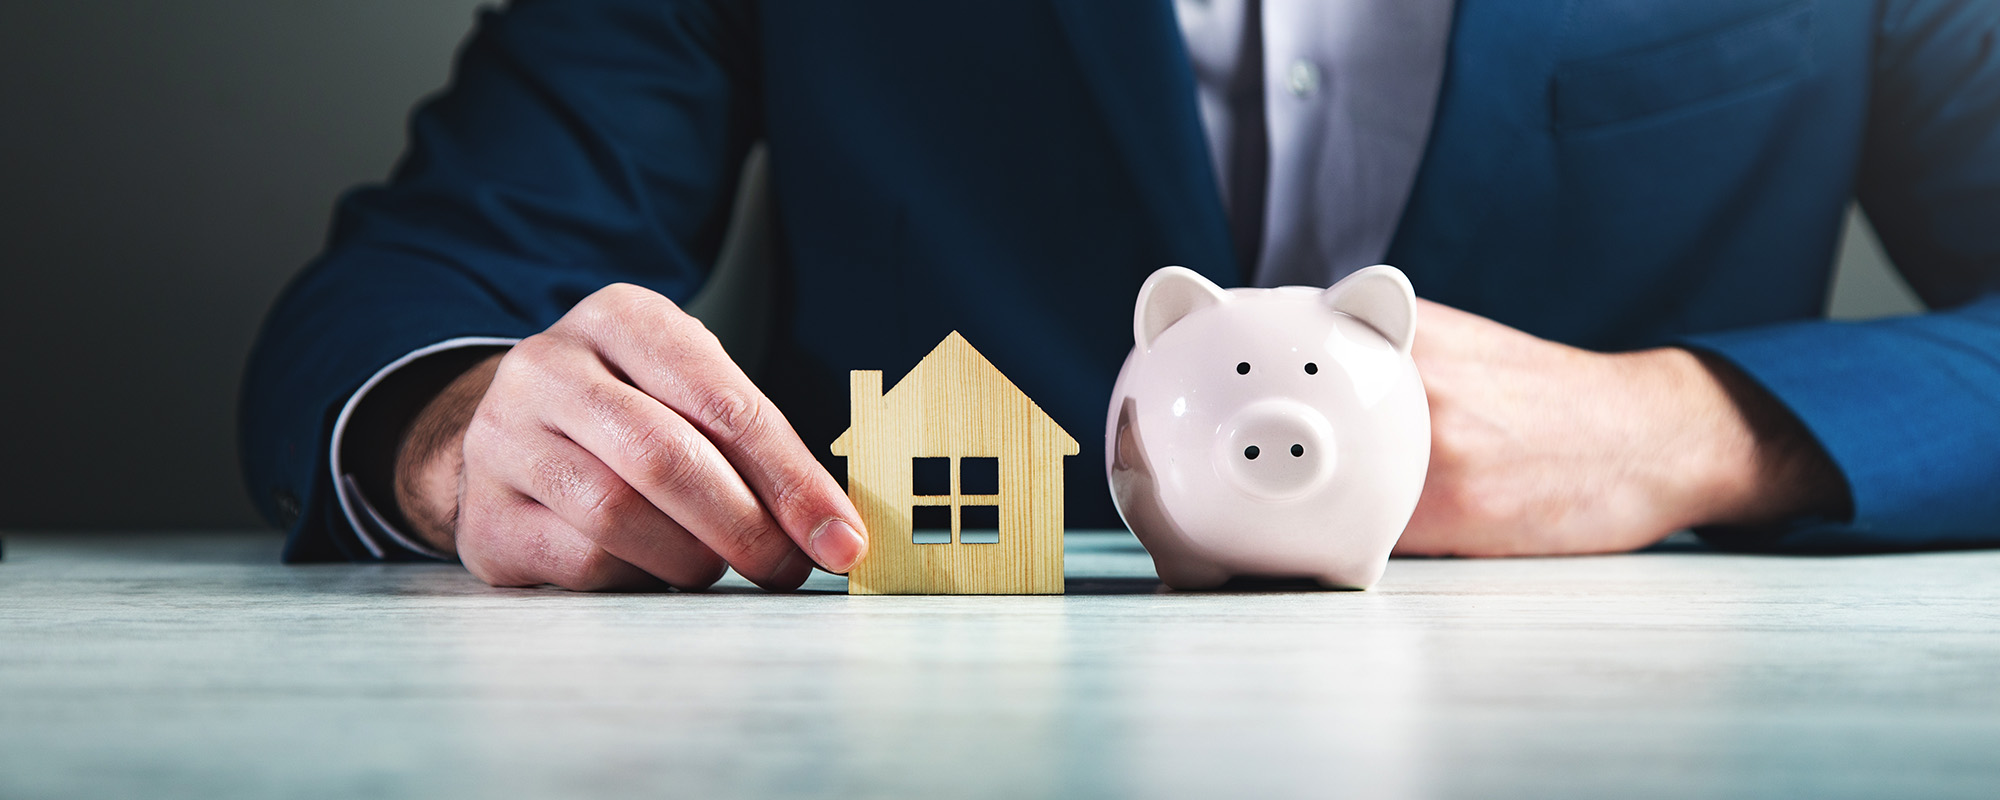 businessman holding wooden house and piggy bank 